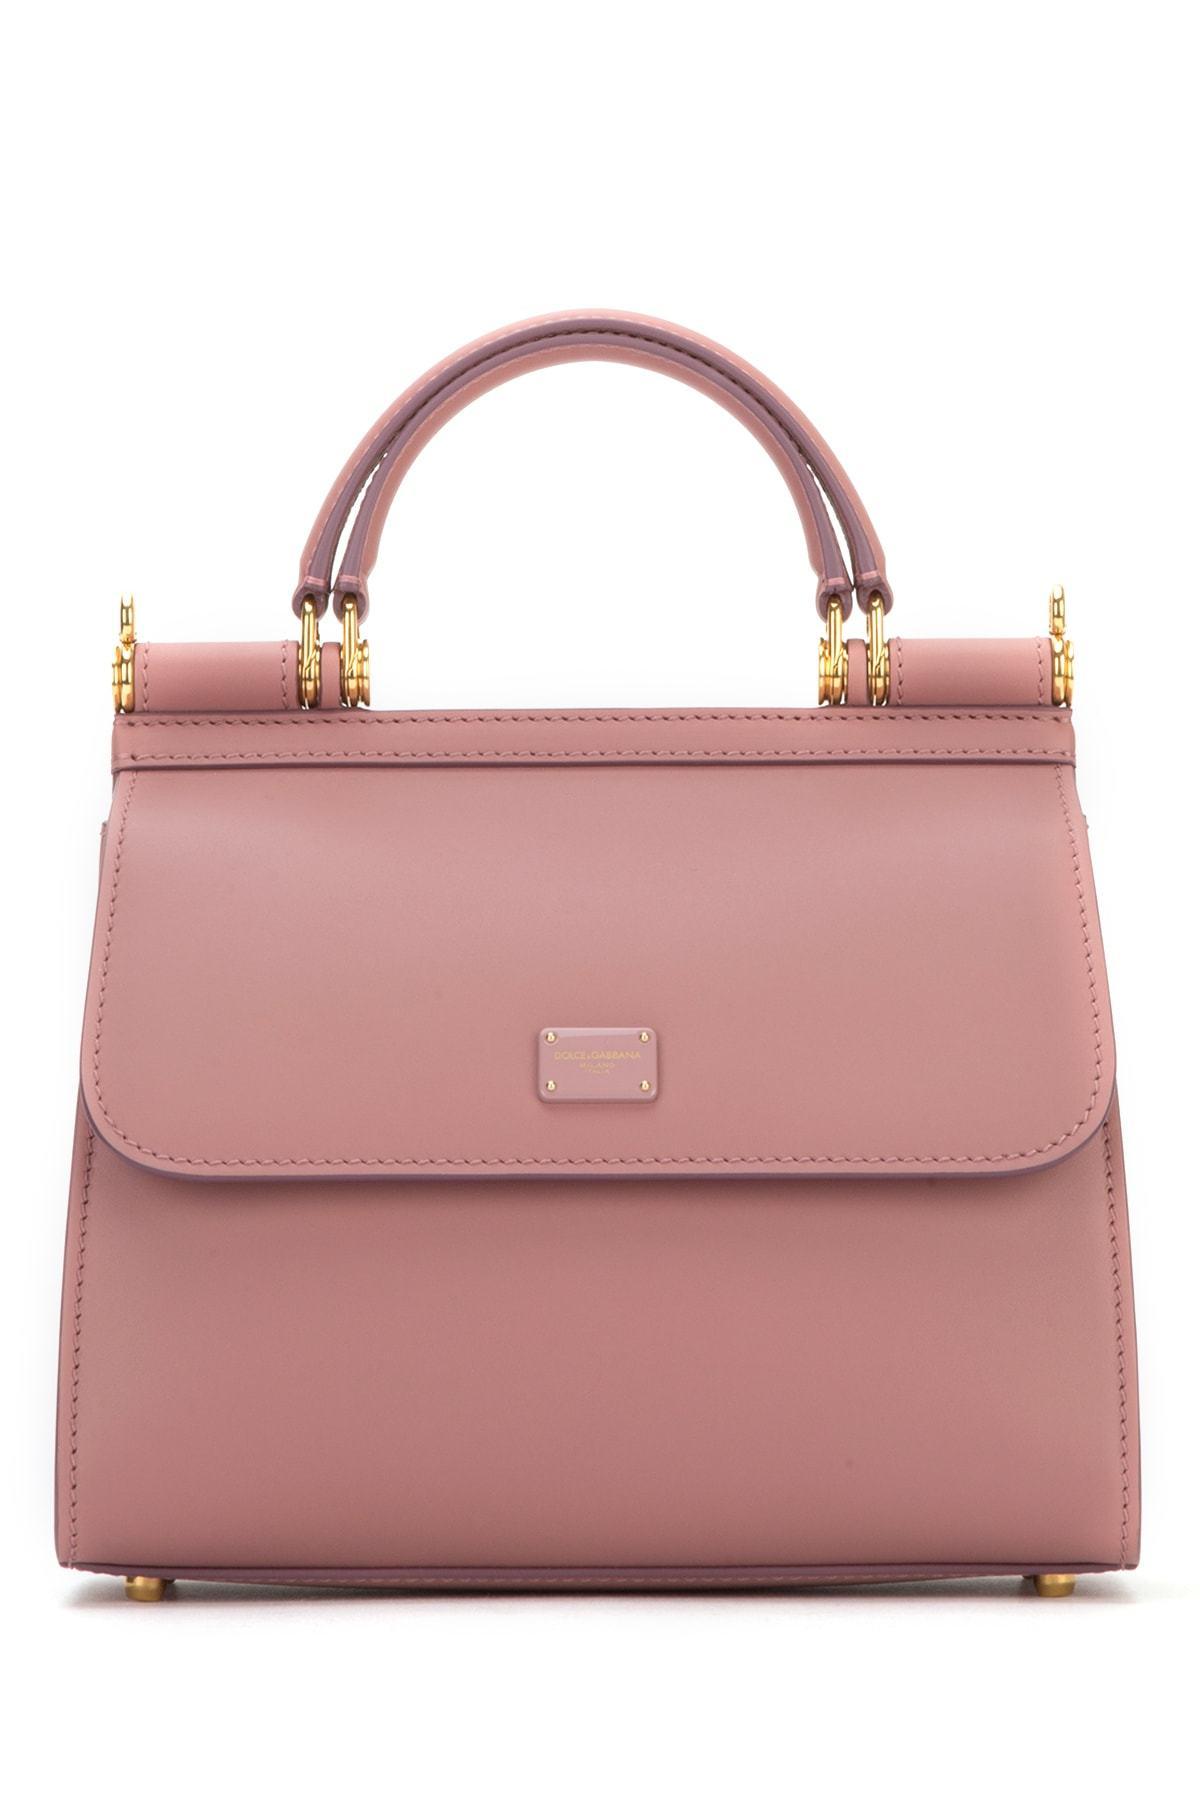 Dolce & Gabbana Leather Sicily 58 Tote Bag in Pink - Lyst